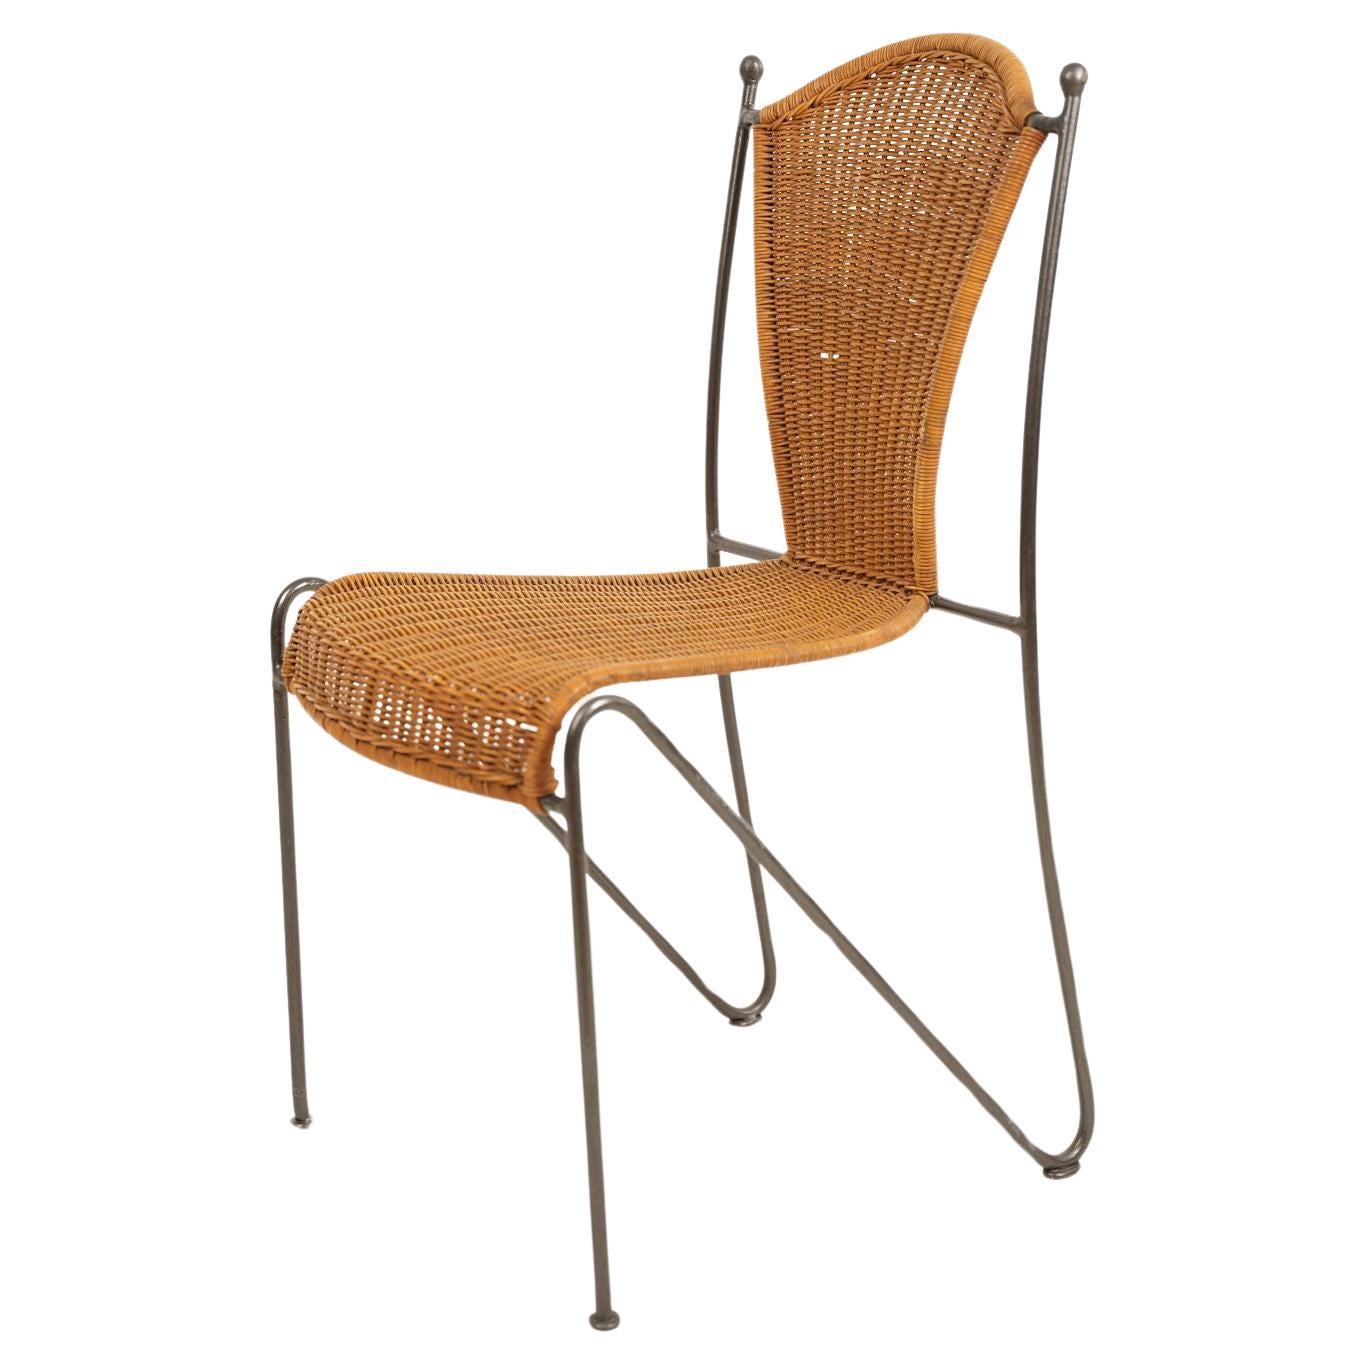 Wicker and Iron Chair By Frederic Weinberg 1950s For Sale